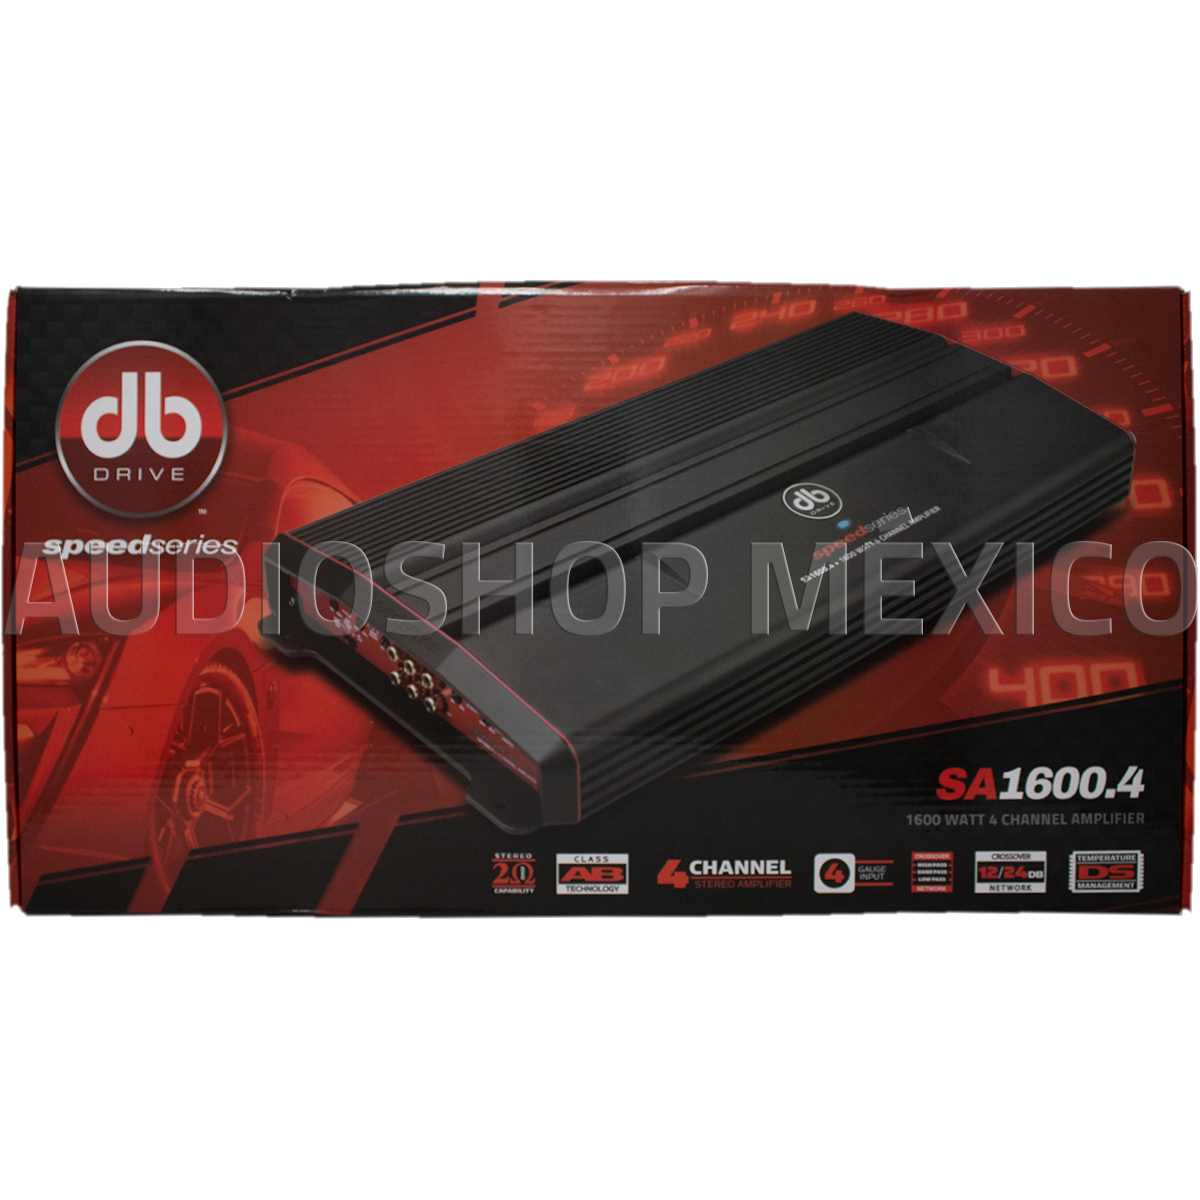 Amplificador 4 Canales DB Drive SA1600.4 1600 Watts Clase AB 2 Ohms Speed Series